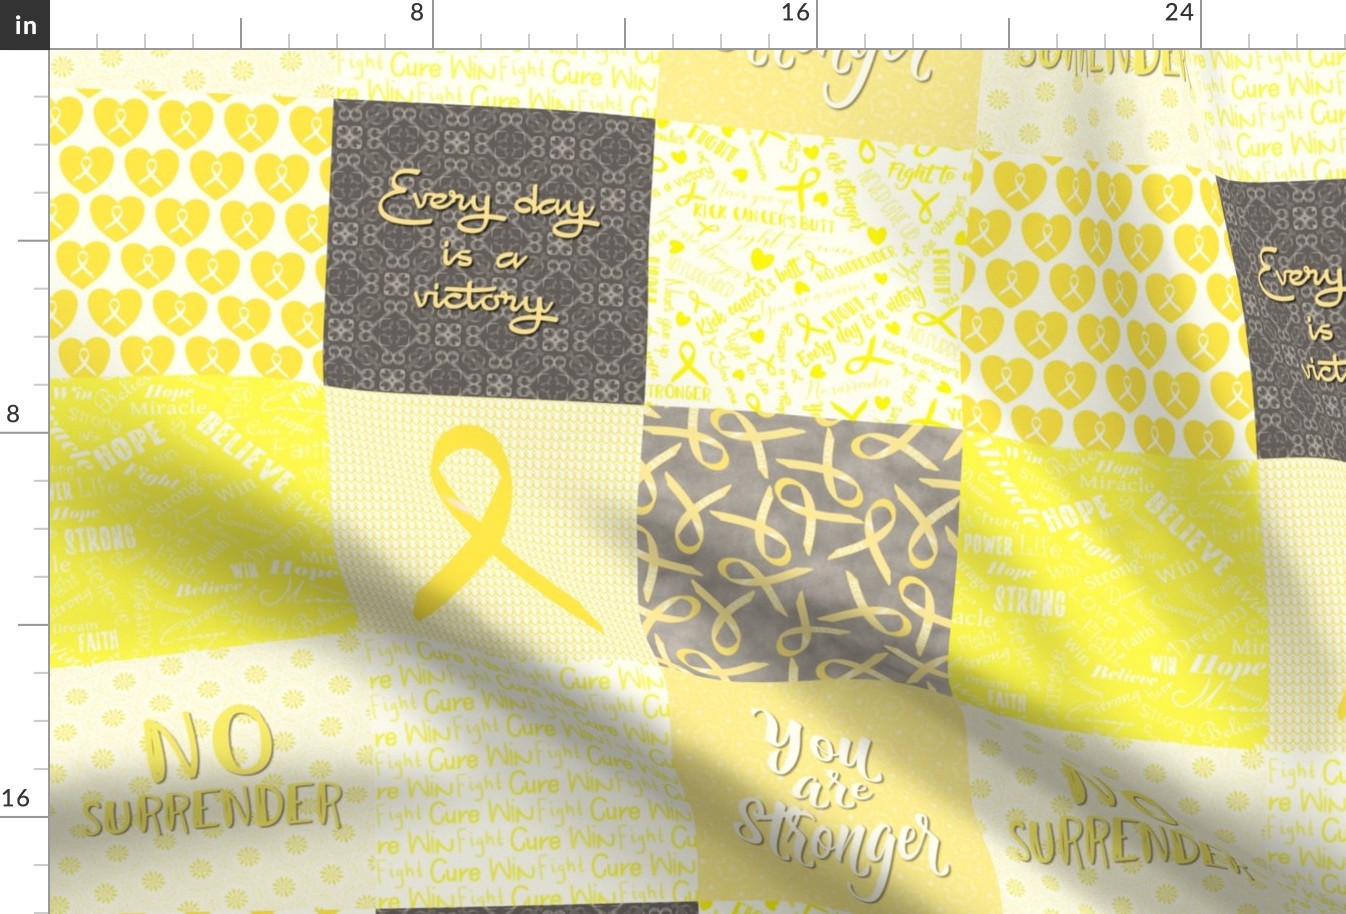 cancer cheater quilt 6 in squares yellow